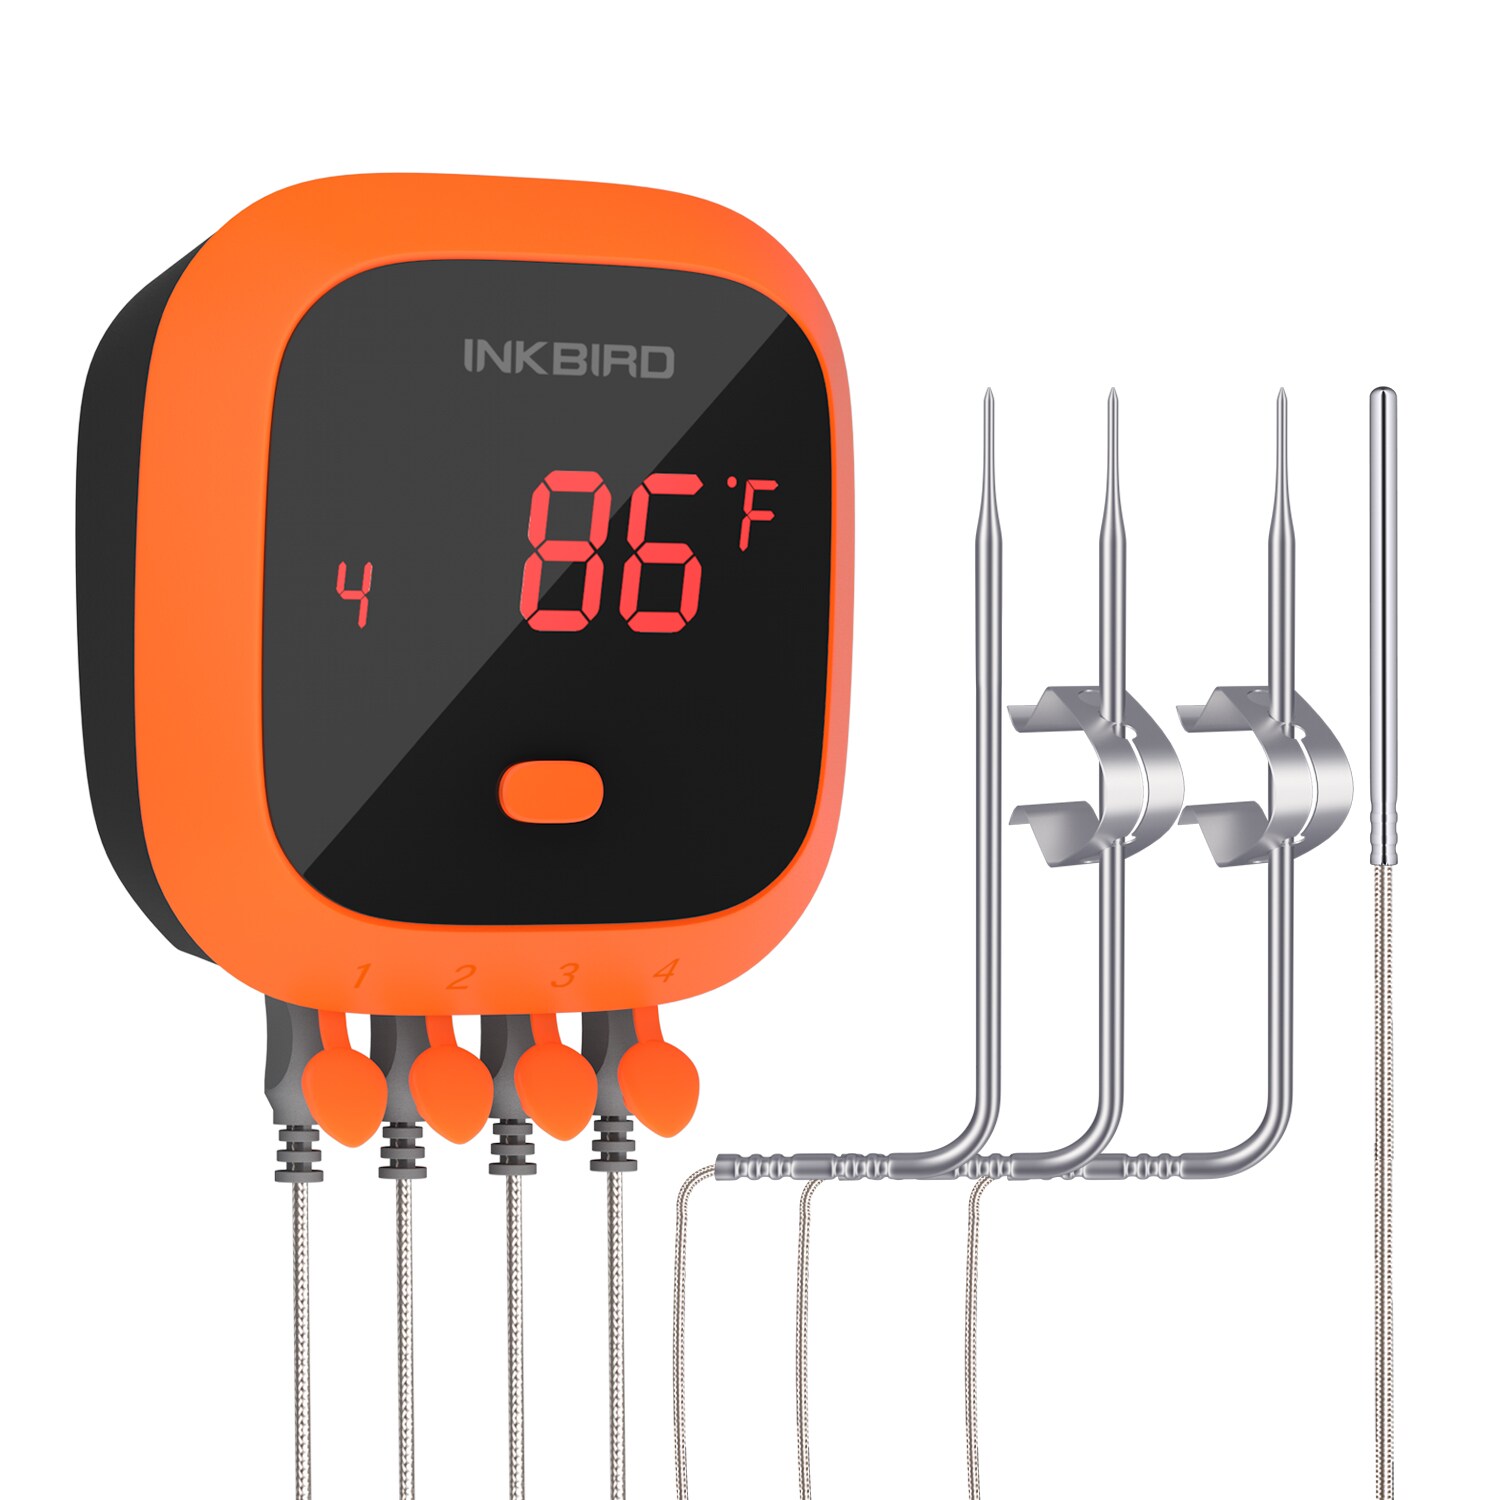  INKBIRD Grill Thermometer Replacement Colored Probes